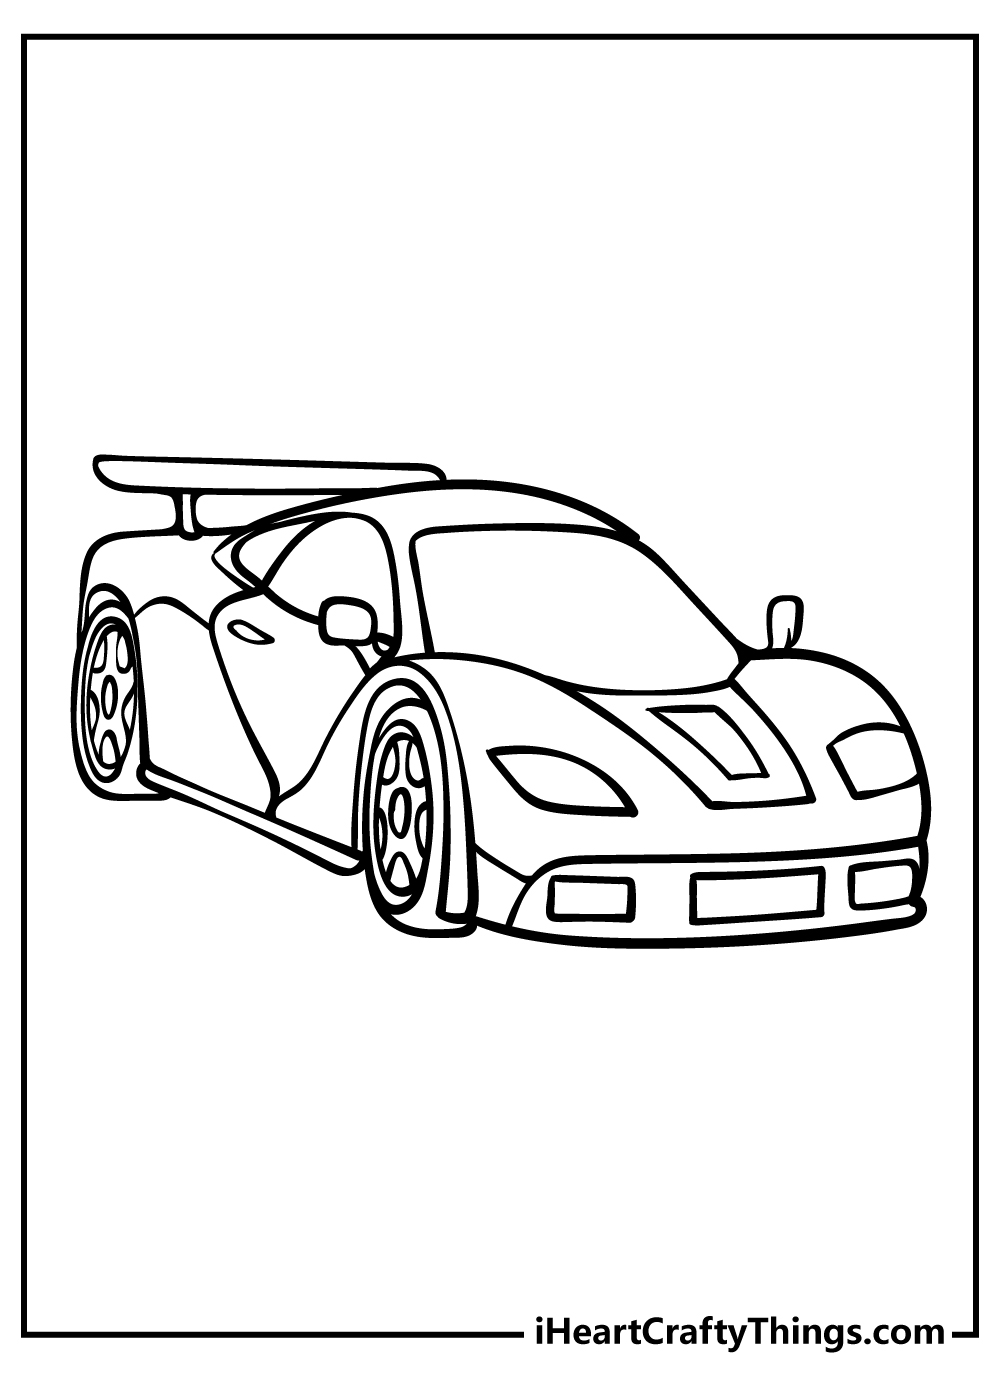 Printable Race Car Coloring Pages Updated 20